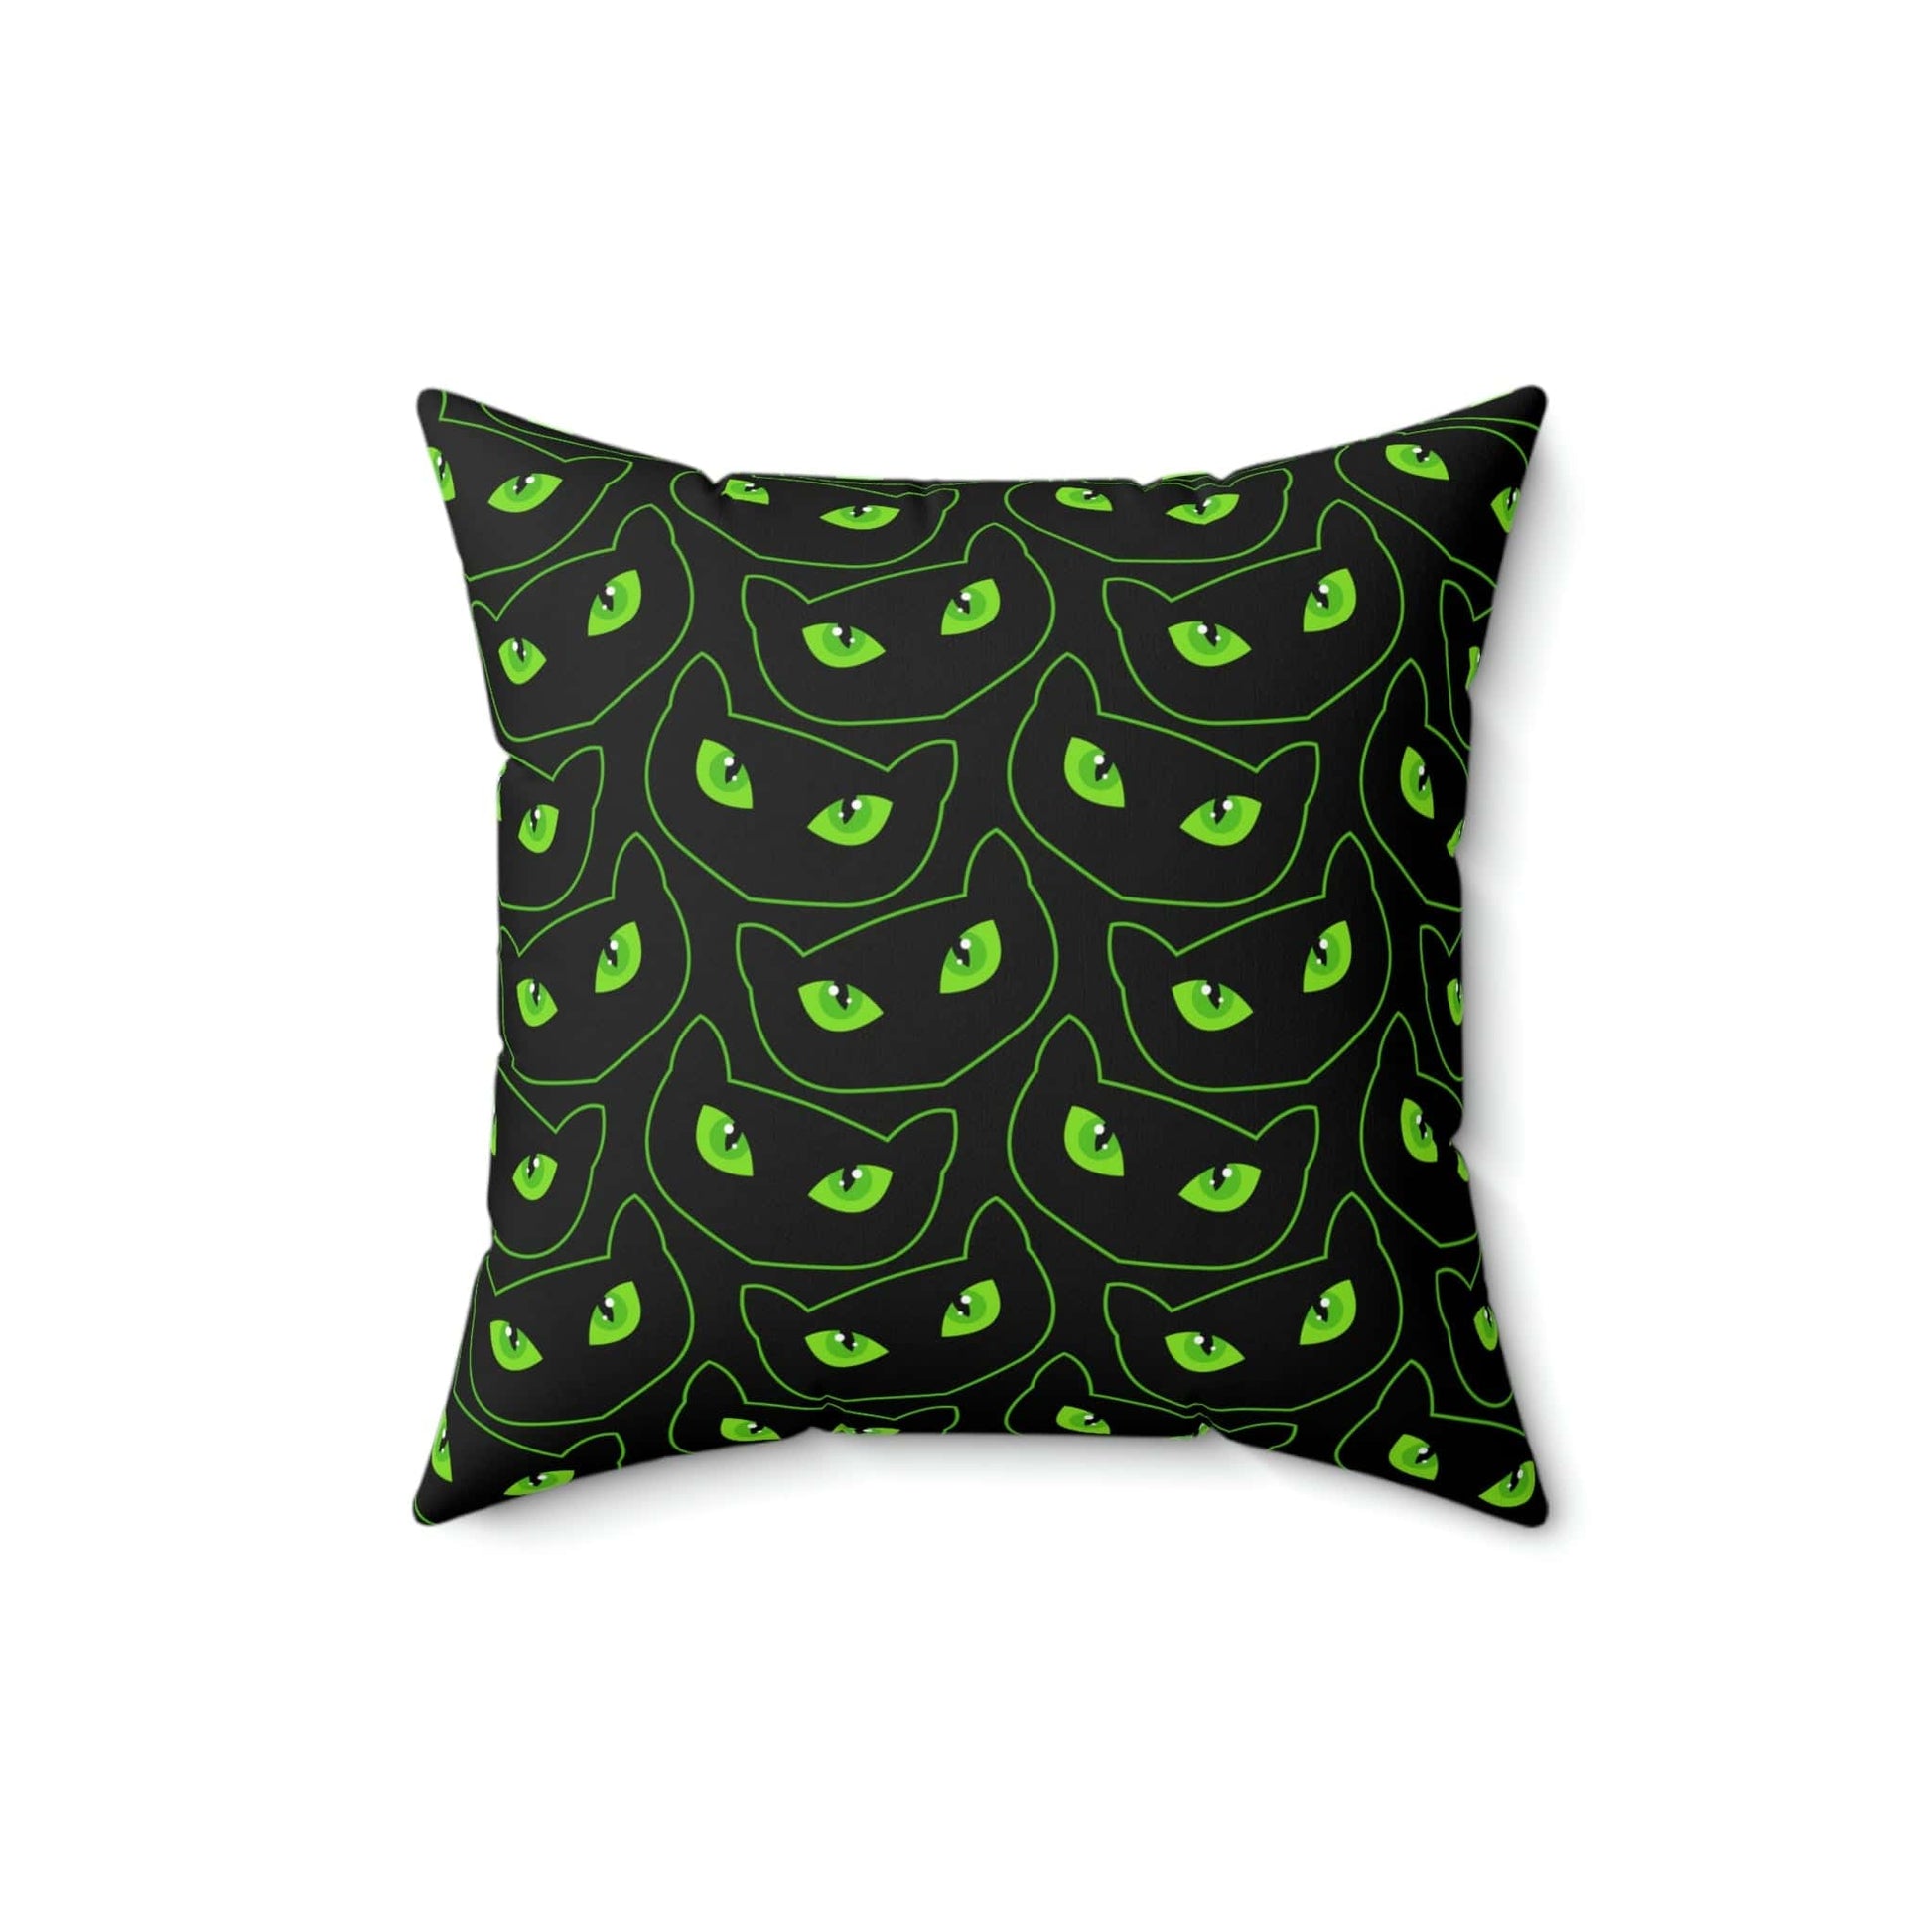 Kate McEnroe New York Halloween Pillow Cover, Spooky Cat Eyes Pillow Case Throw Pillow Covers 16" × 16" 3549431920